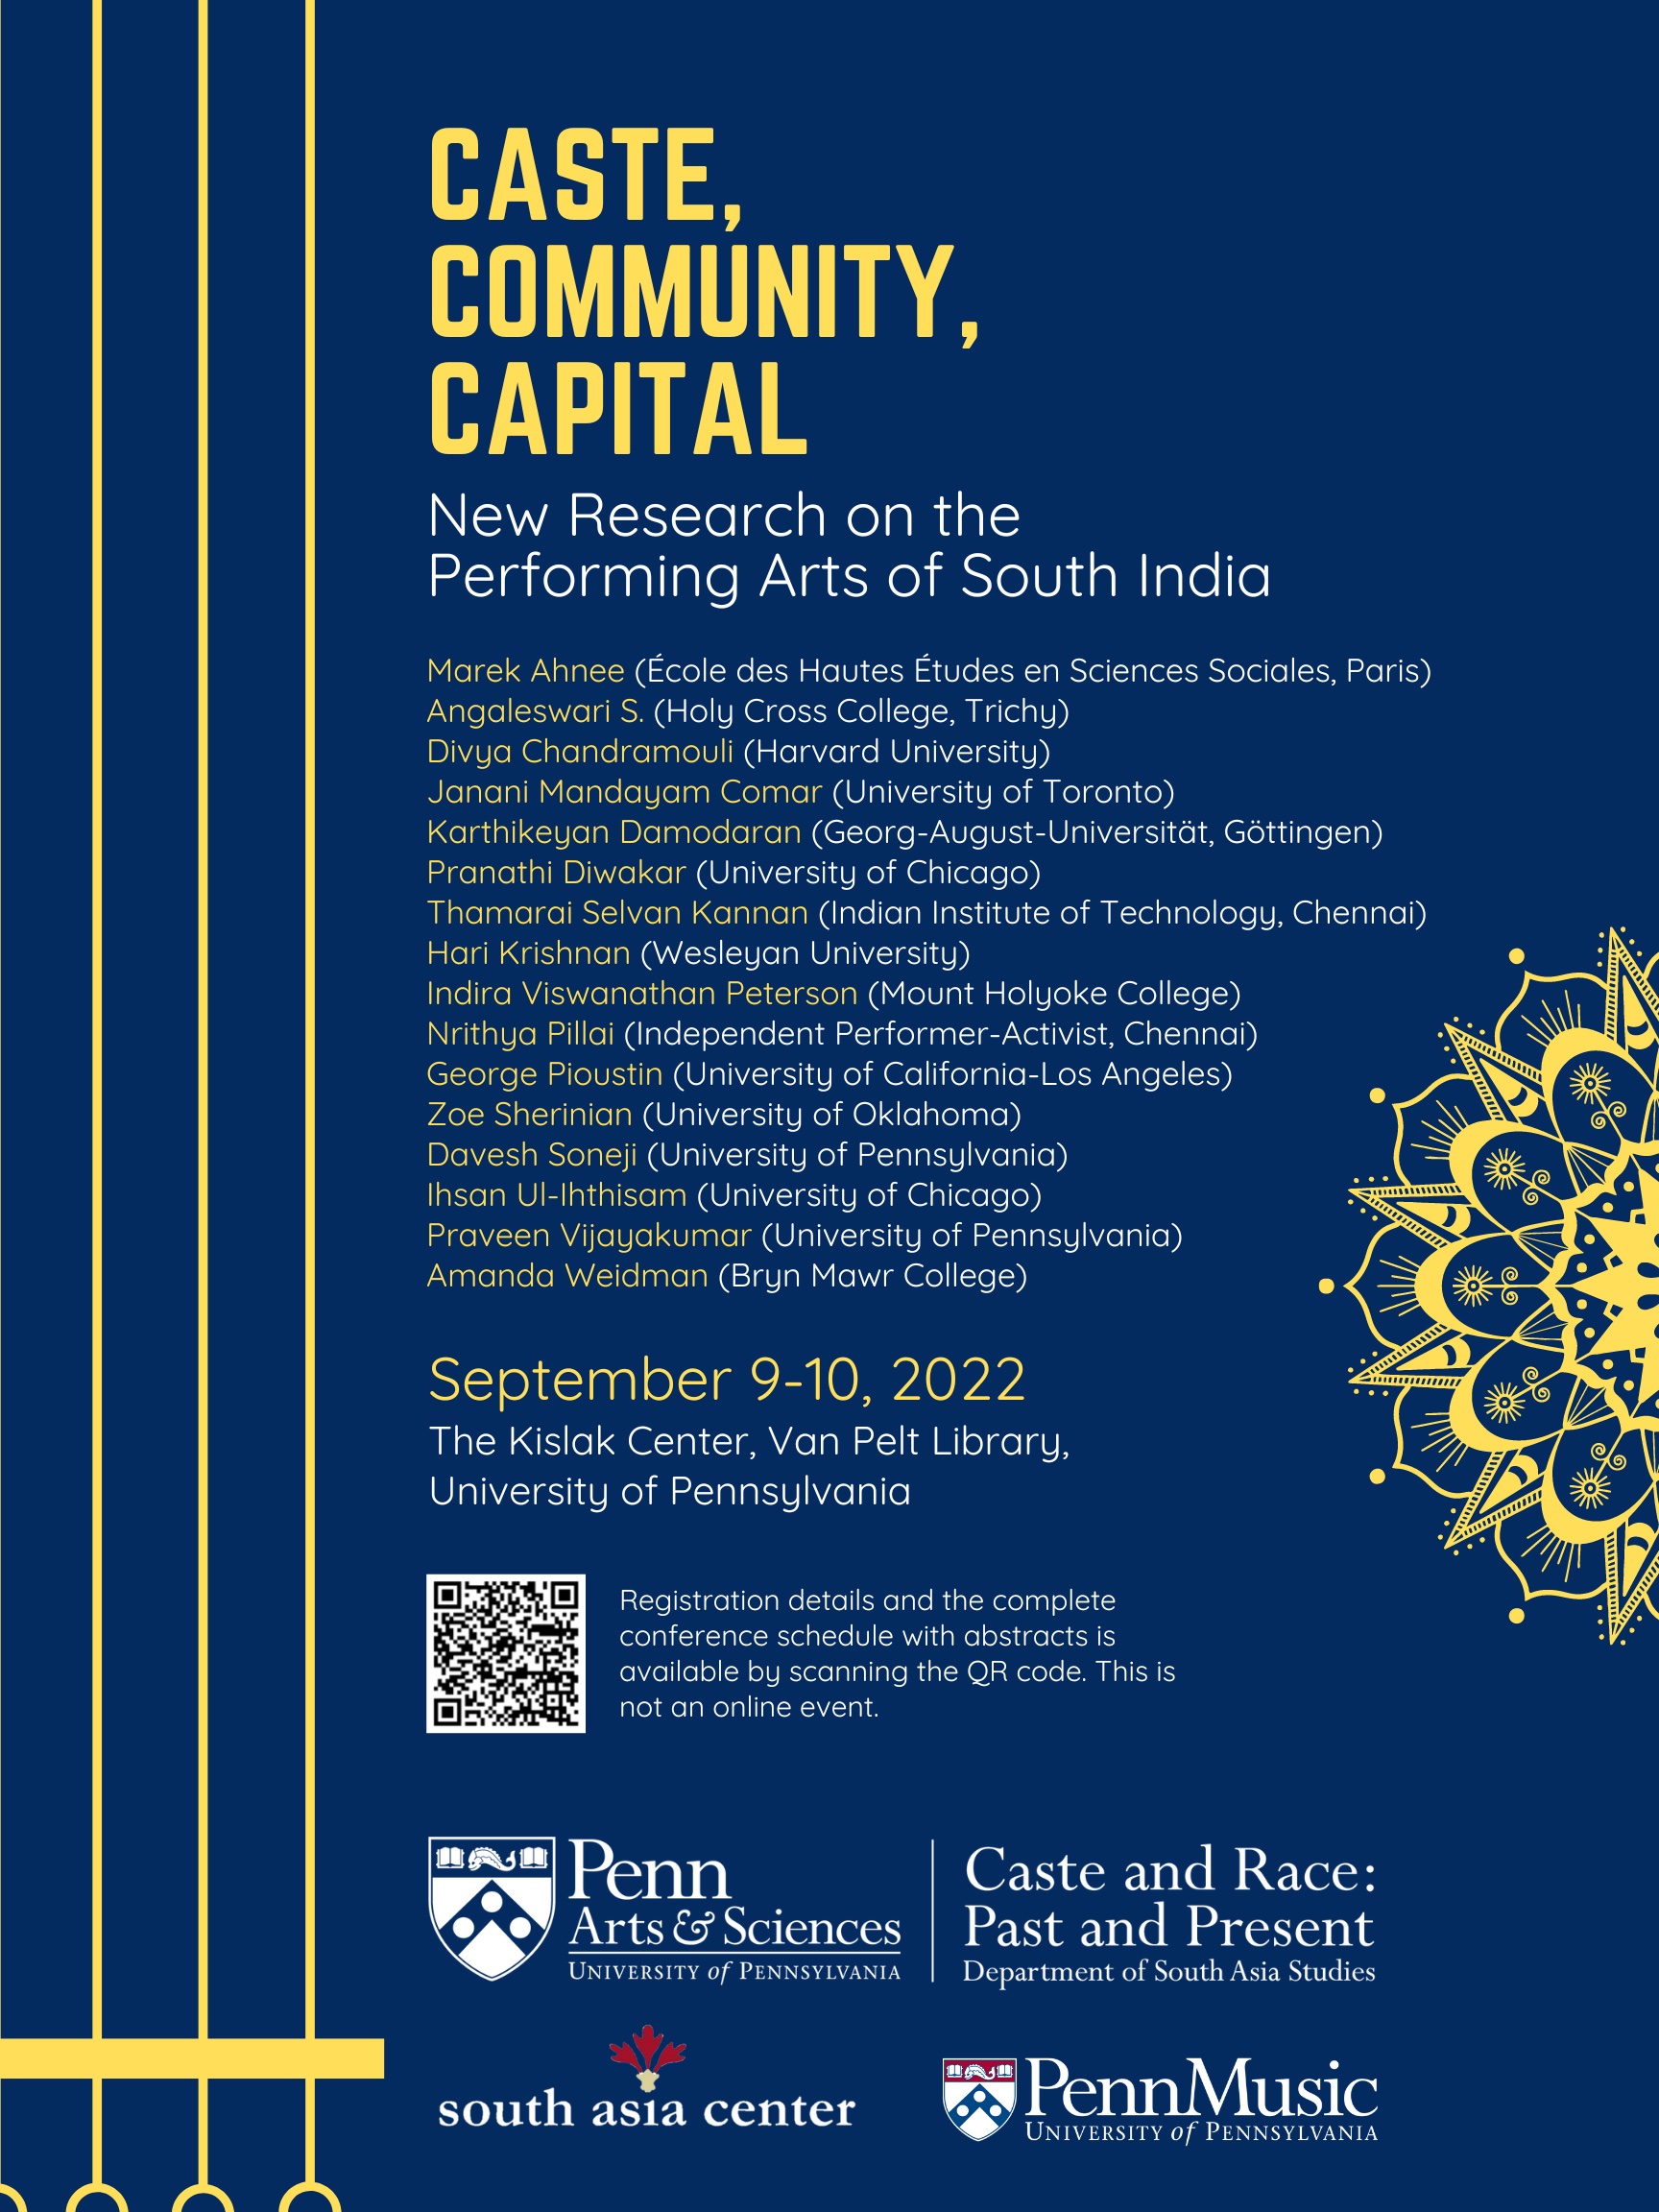 New Research on the Performing Arts of South India. September 9-10, 2022. Penn Arts and Sciences logo. Penn Music logo. South Asia Center logo. Caste and Race: Past and Present Department of South Asia Studies.